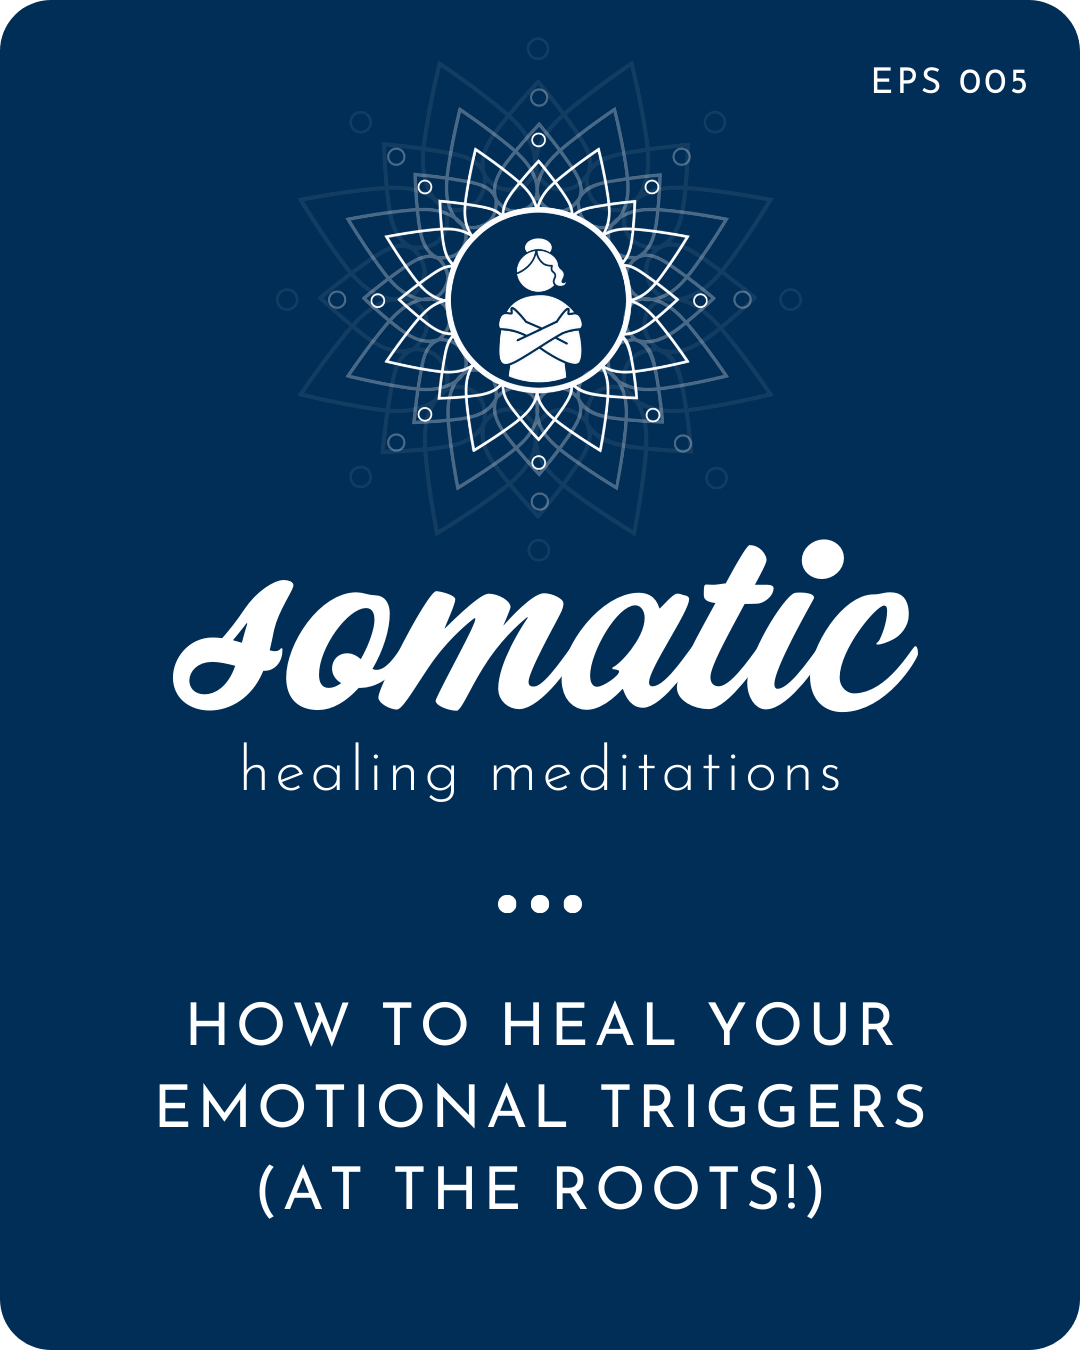 How to Heal Your Emotional Triggers (at the roots!)